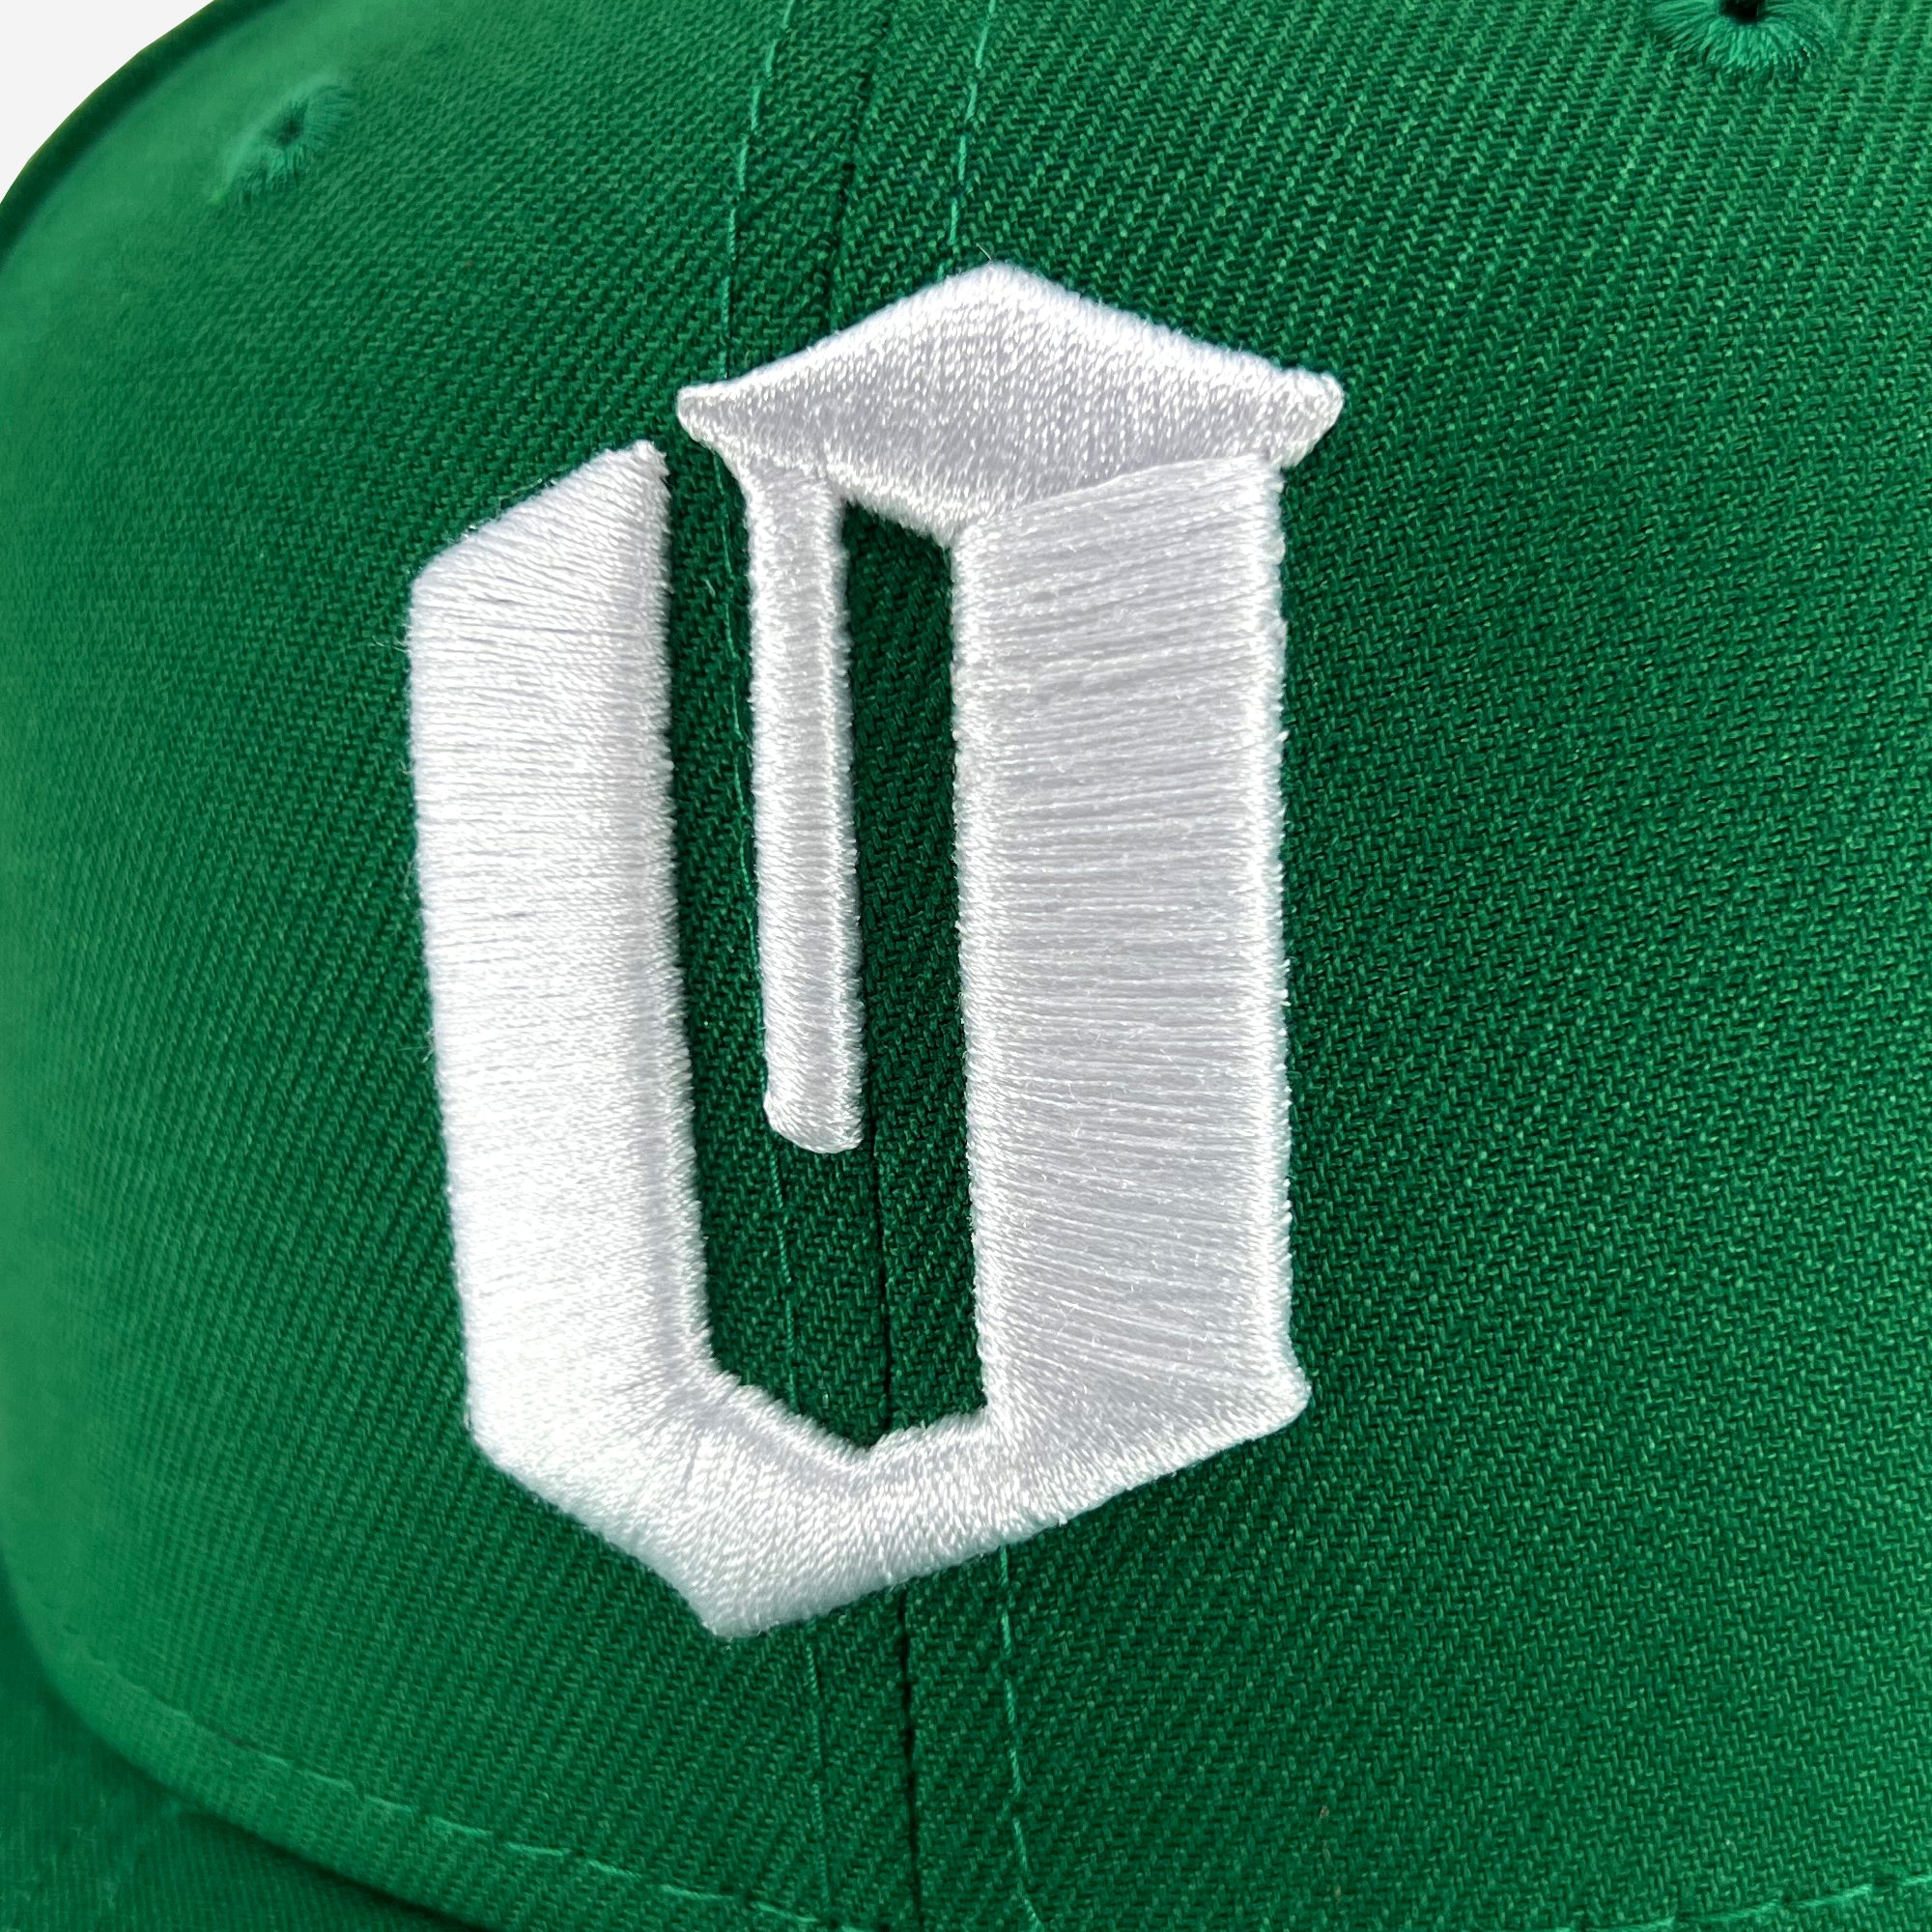 Close up of white embroidered O for Oakland on kelly green New Era cap.